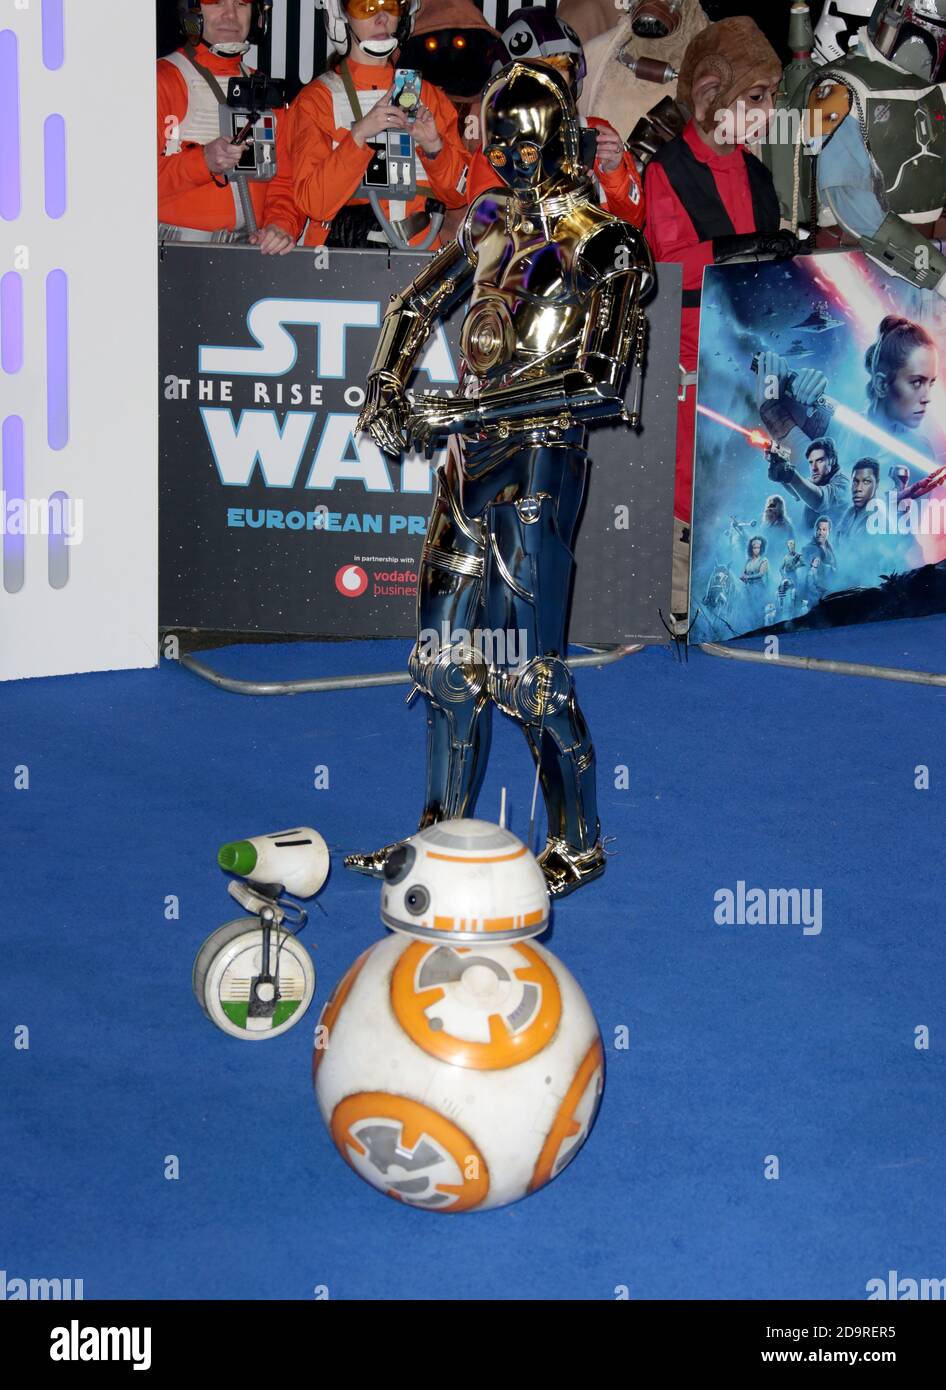 Dec 18, 2019 - London, England, UK - Star Wars: The Rise of Skywalker UK Premiere, Cineworld, Leicester Square - Red Carpet Arrivals Photo Shows: D-O, Stock Photo